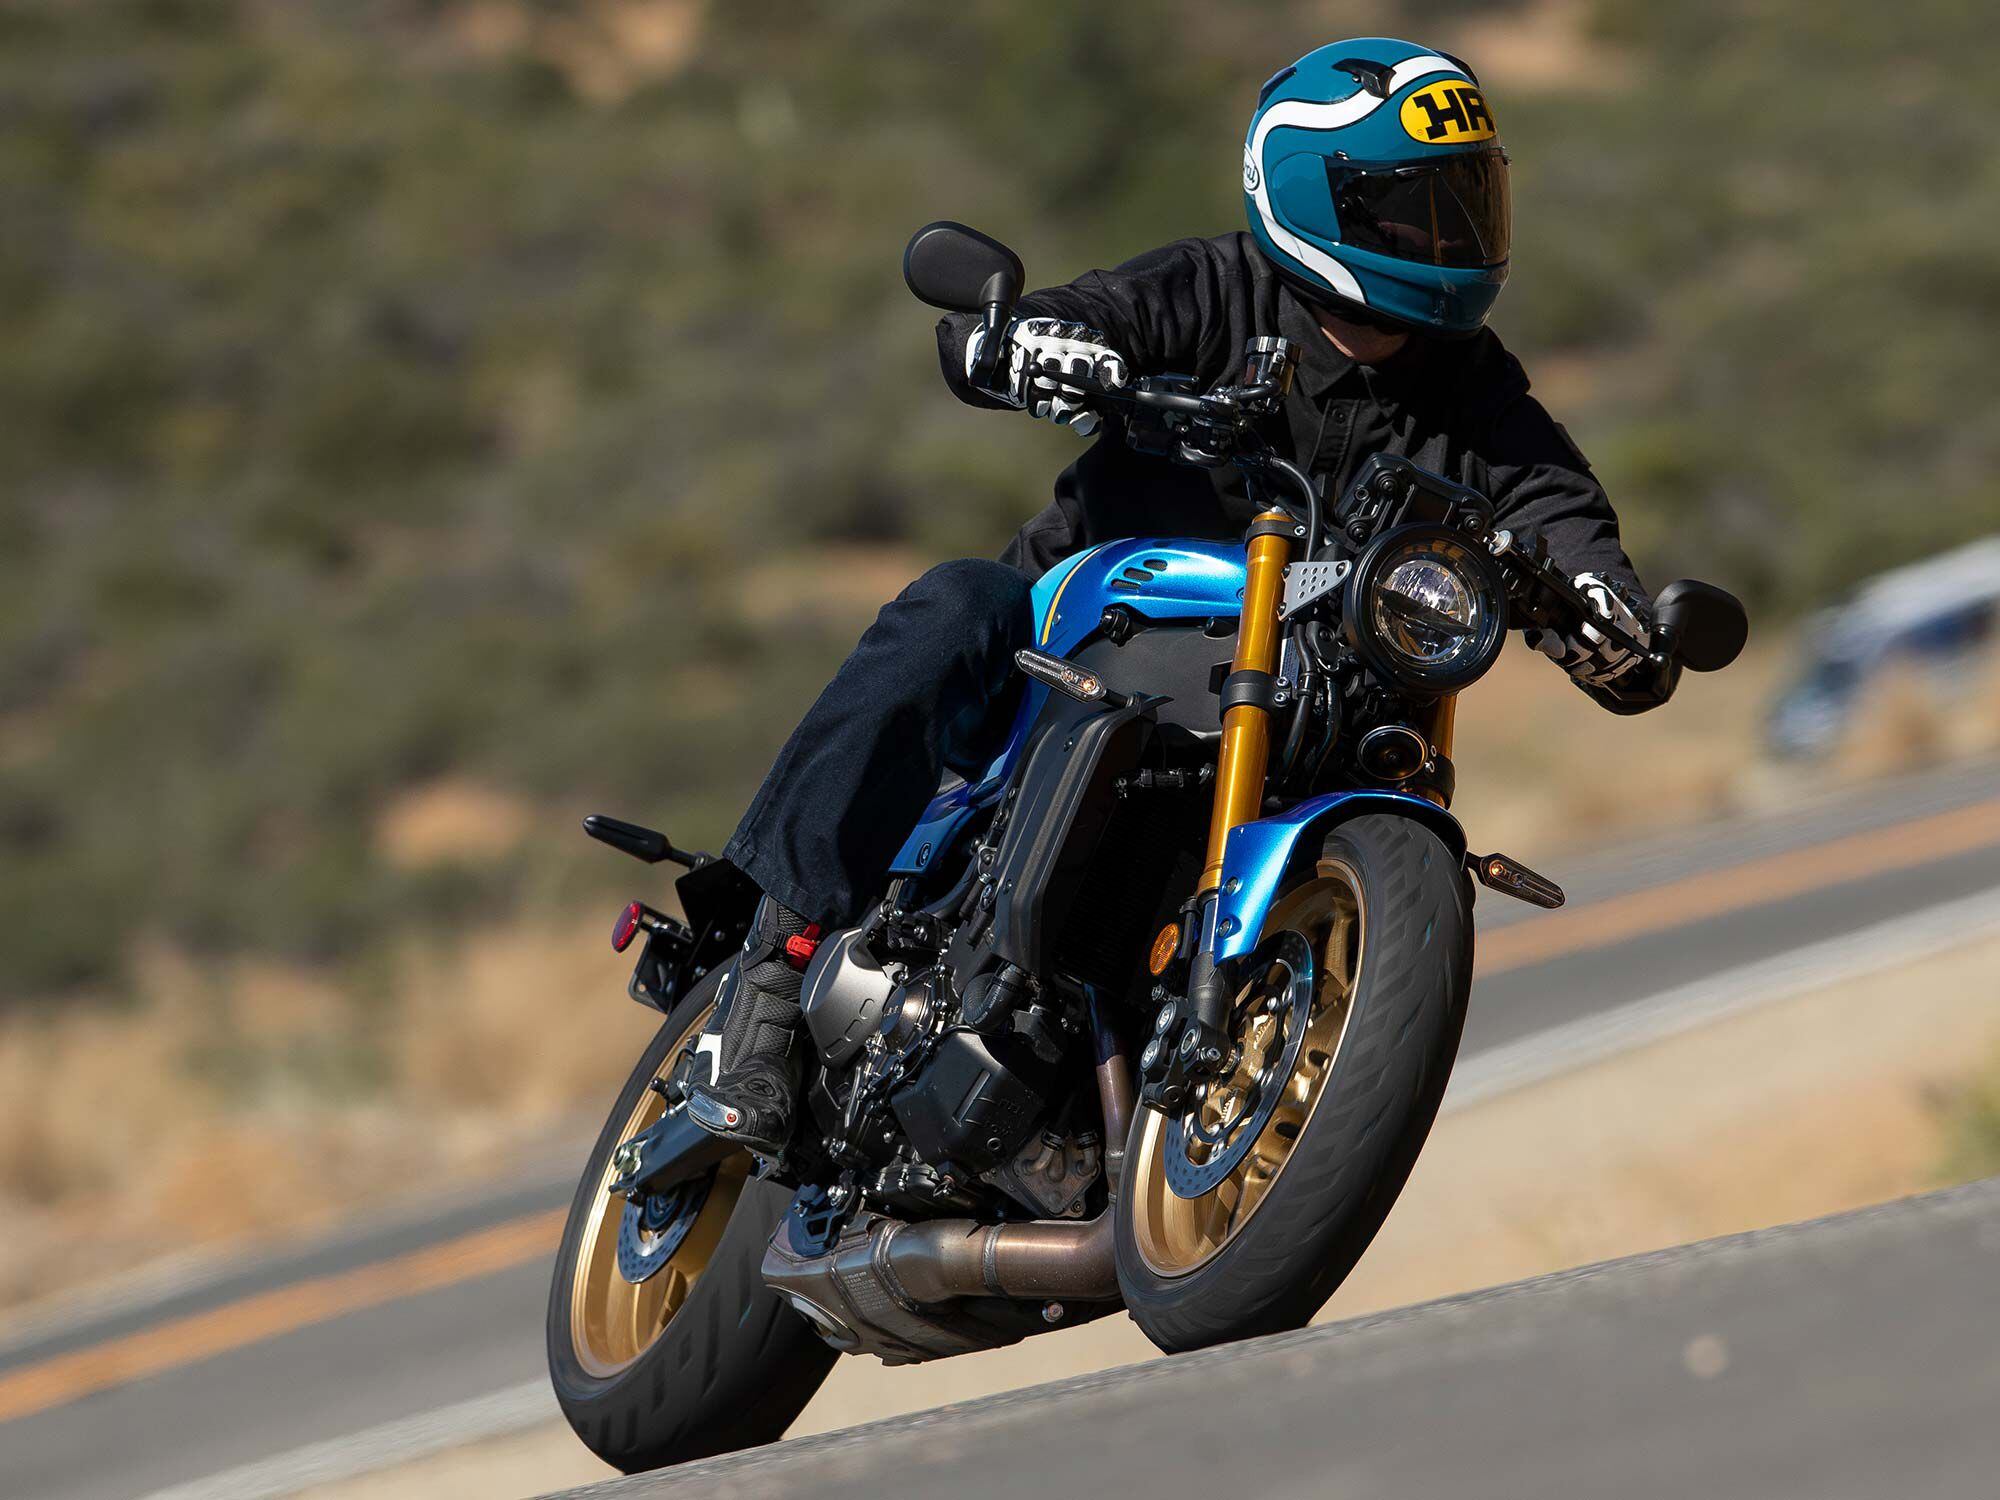 Yamaha’s updated CP3 engine is as fun as ever on a flowing section of canyon road.